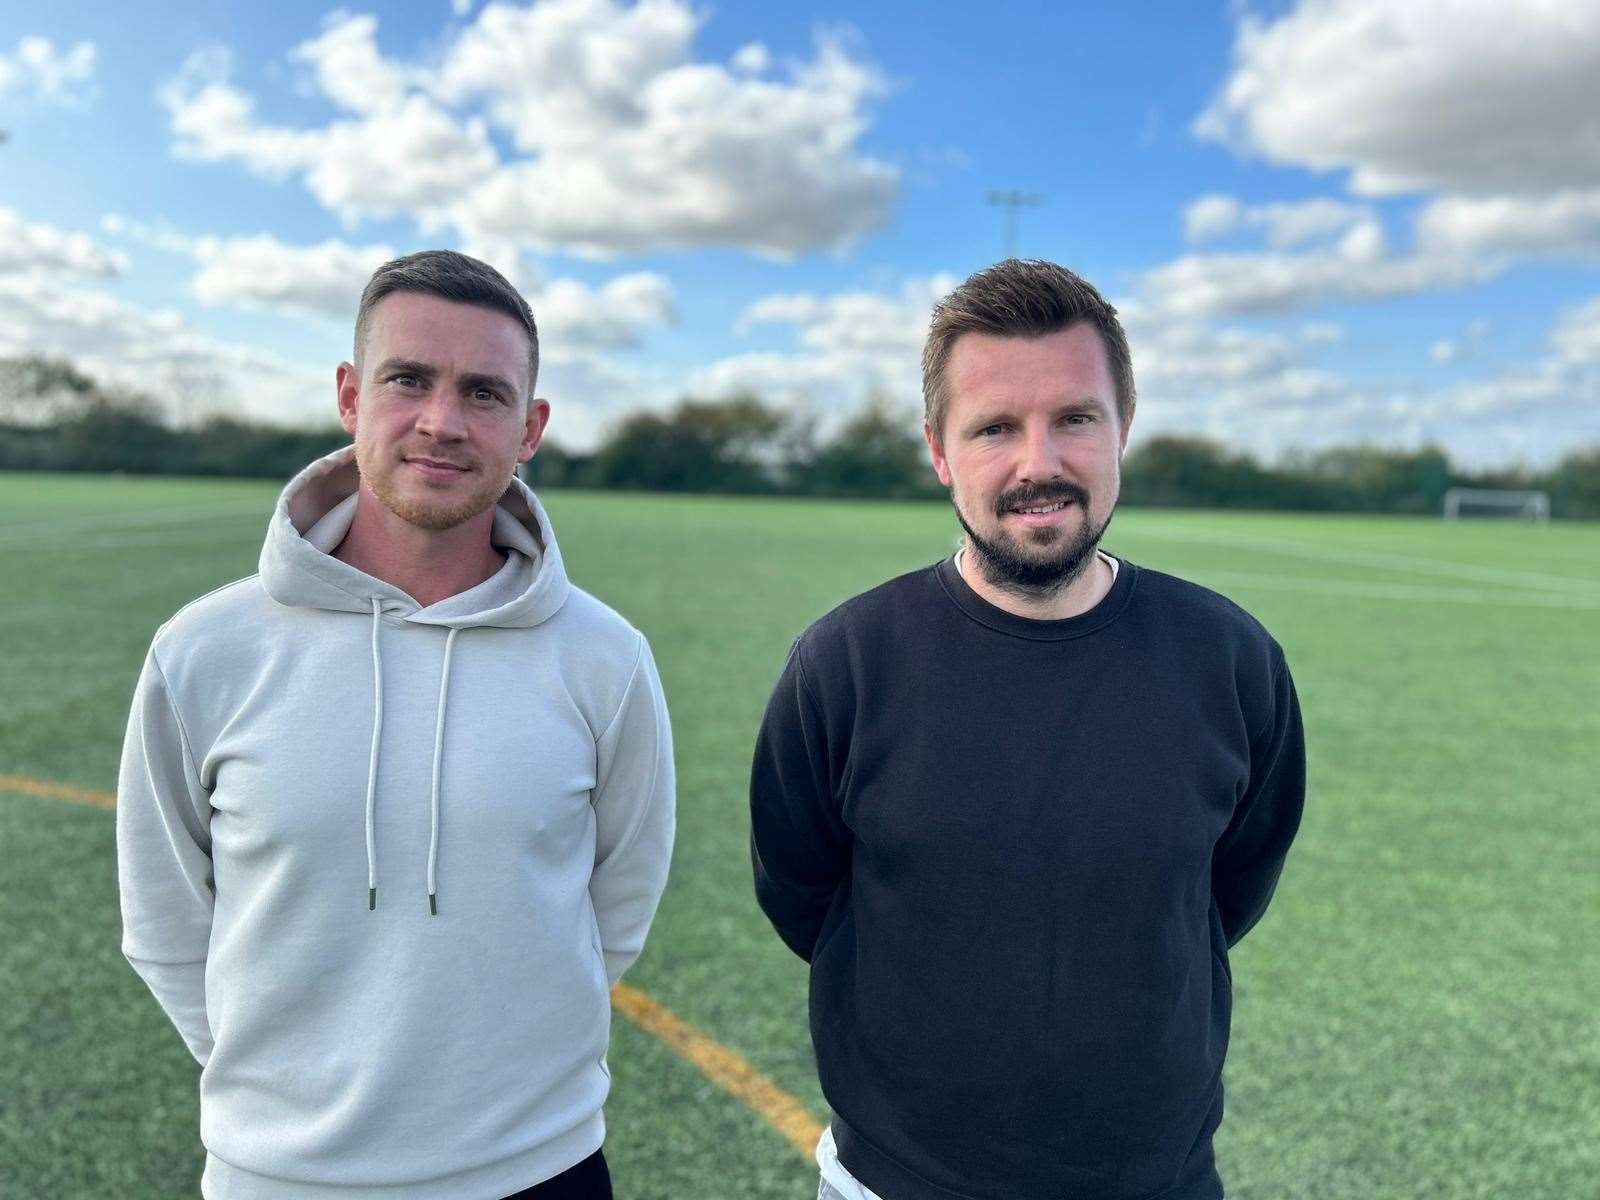 The new-look Linnets management team of Adam Lakeland, right, and Sam Walker.